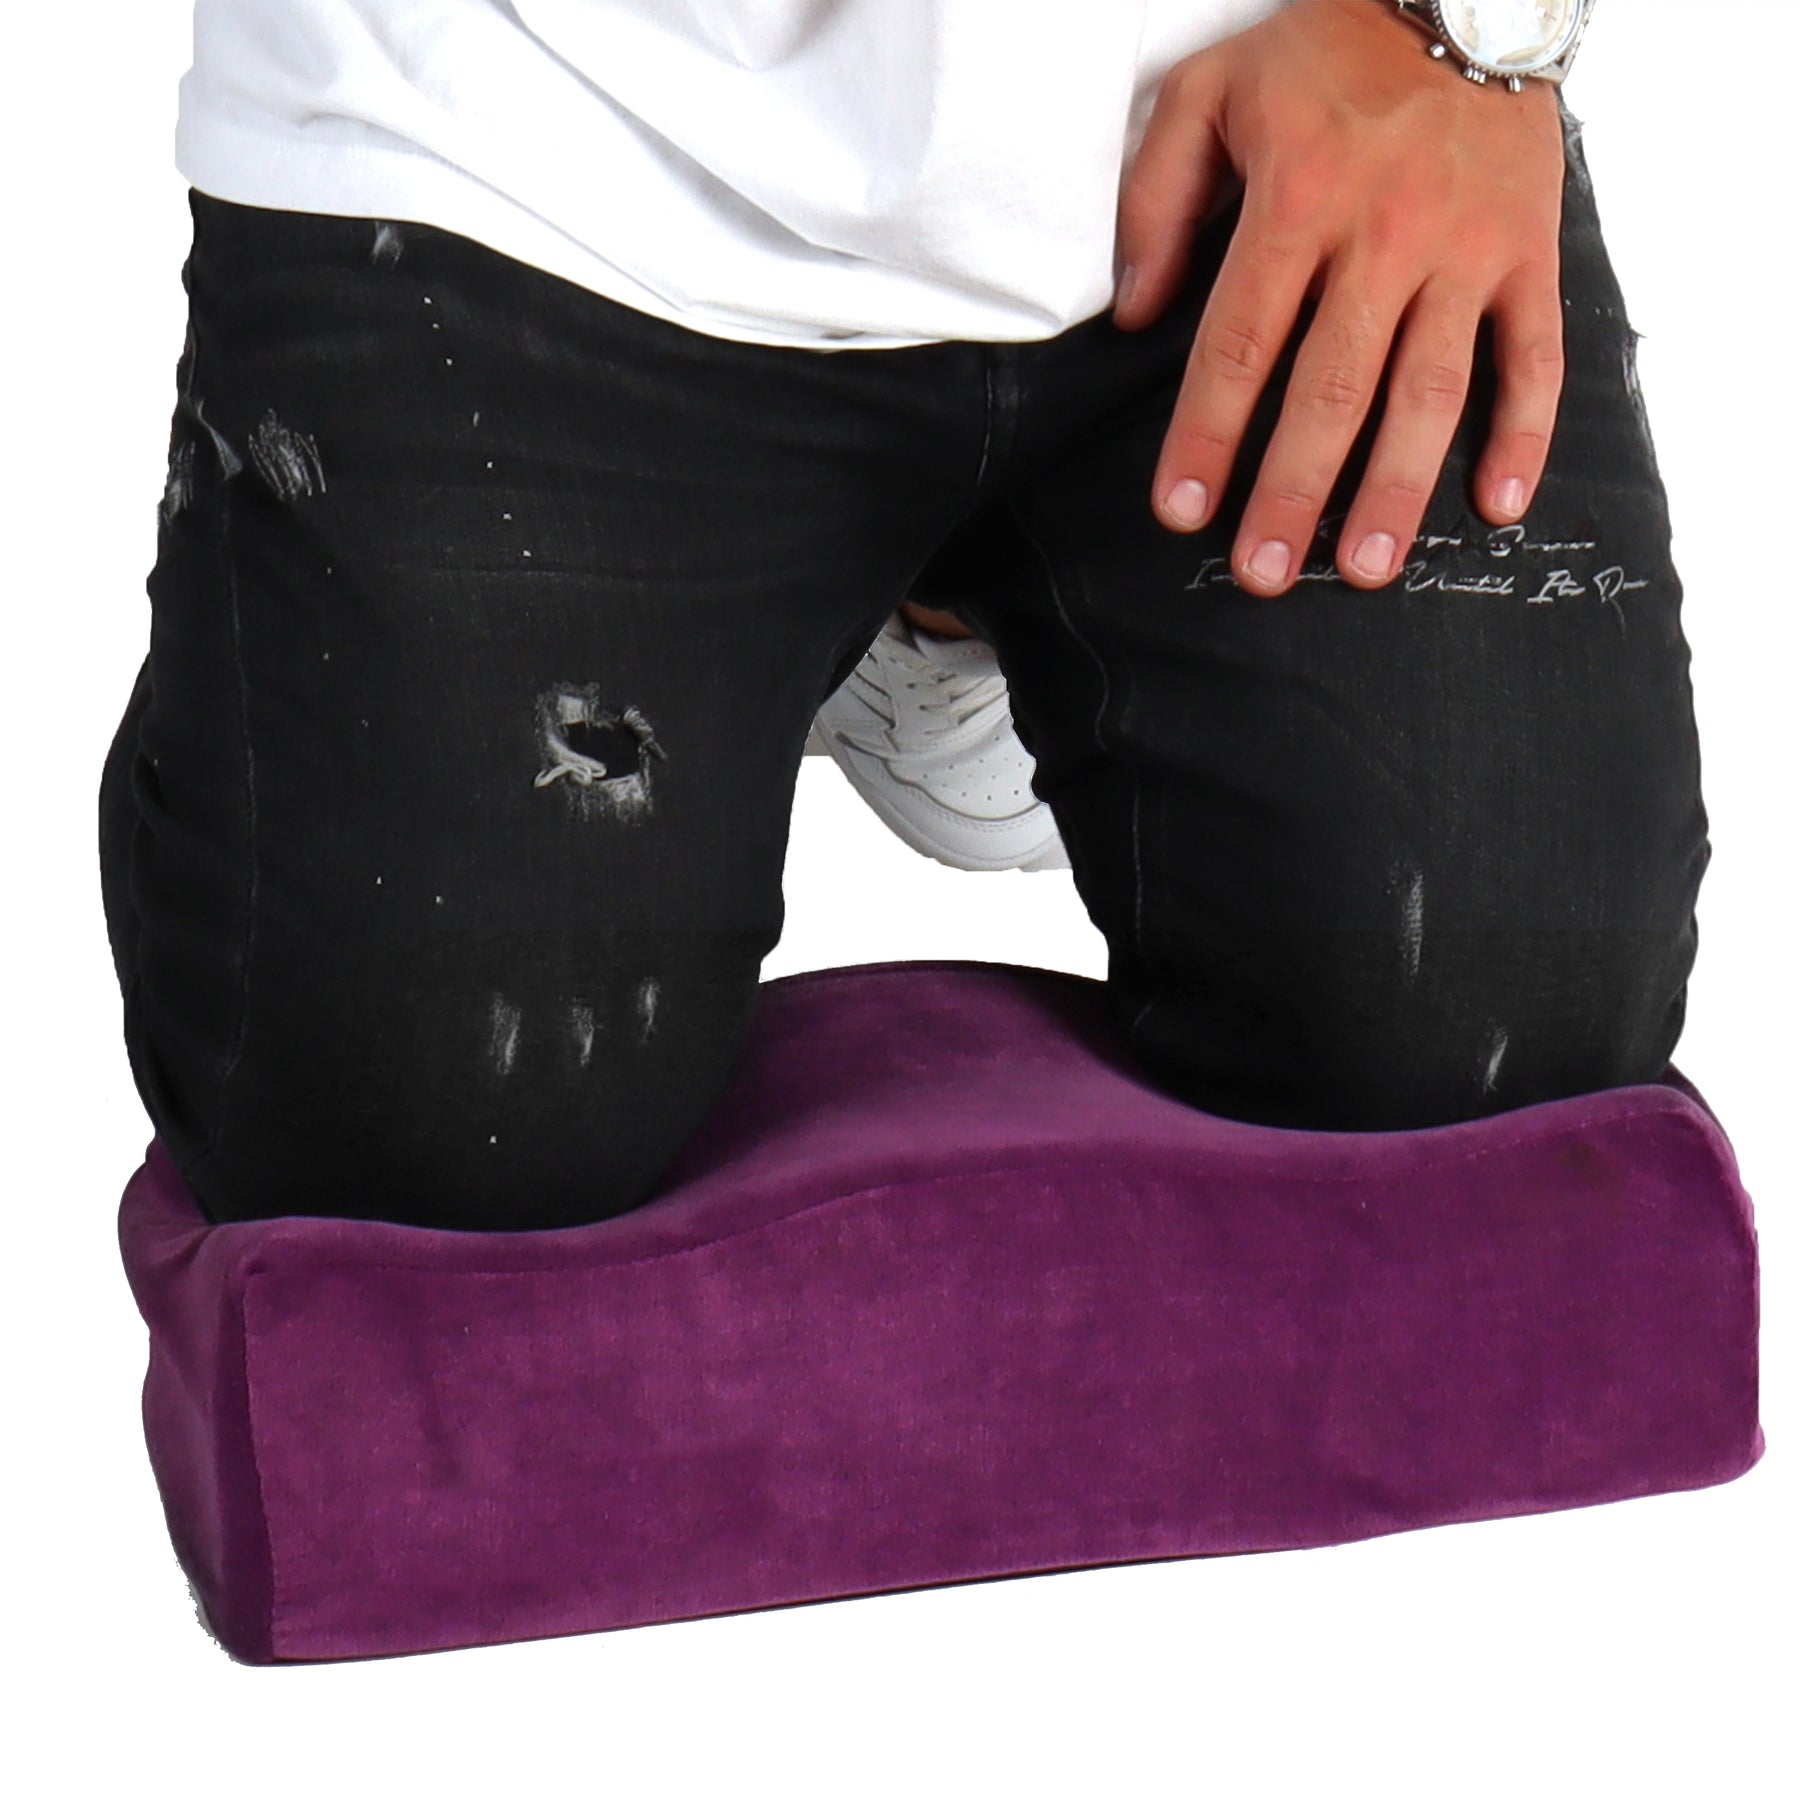 Durable & Comfortable Kneeling Pad - Ultimate Knee Protection Solution